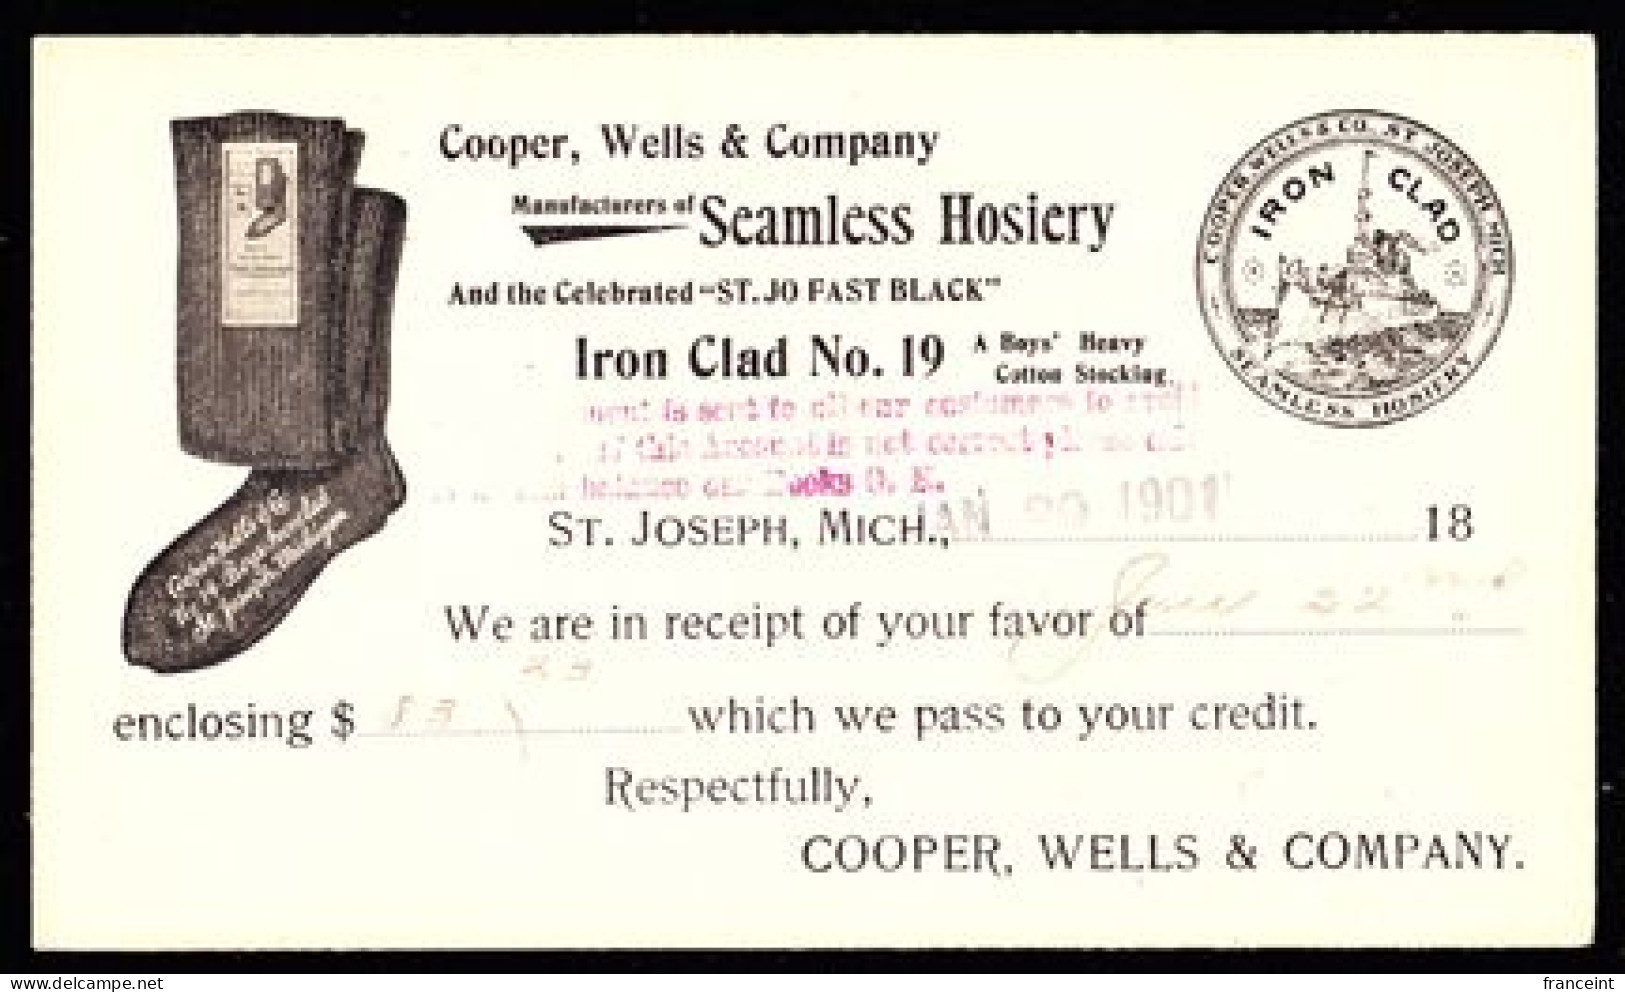 U.S.A.(1901) Socks. Naval Ship. One Cent Postal Card With Illustrated Ad For Cooper, Wells Seamless Hosiery. Logo Of An - 1901-20